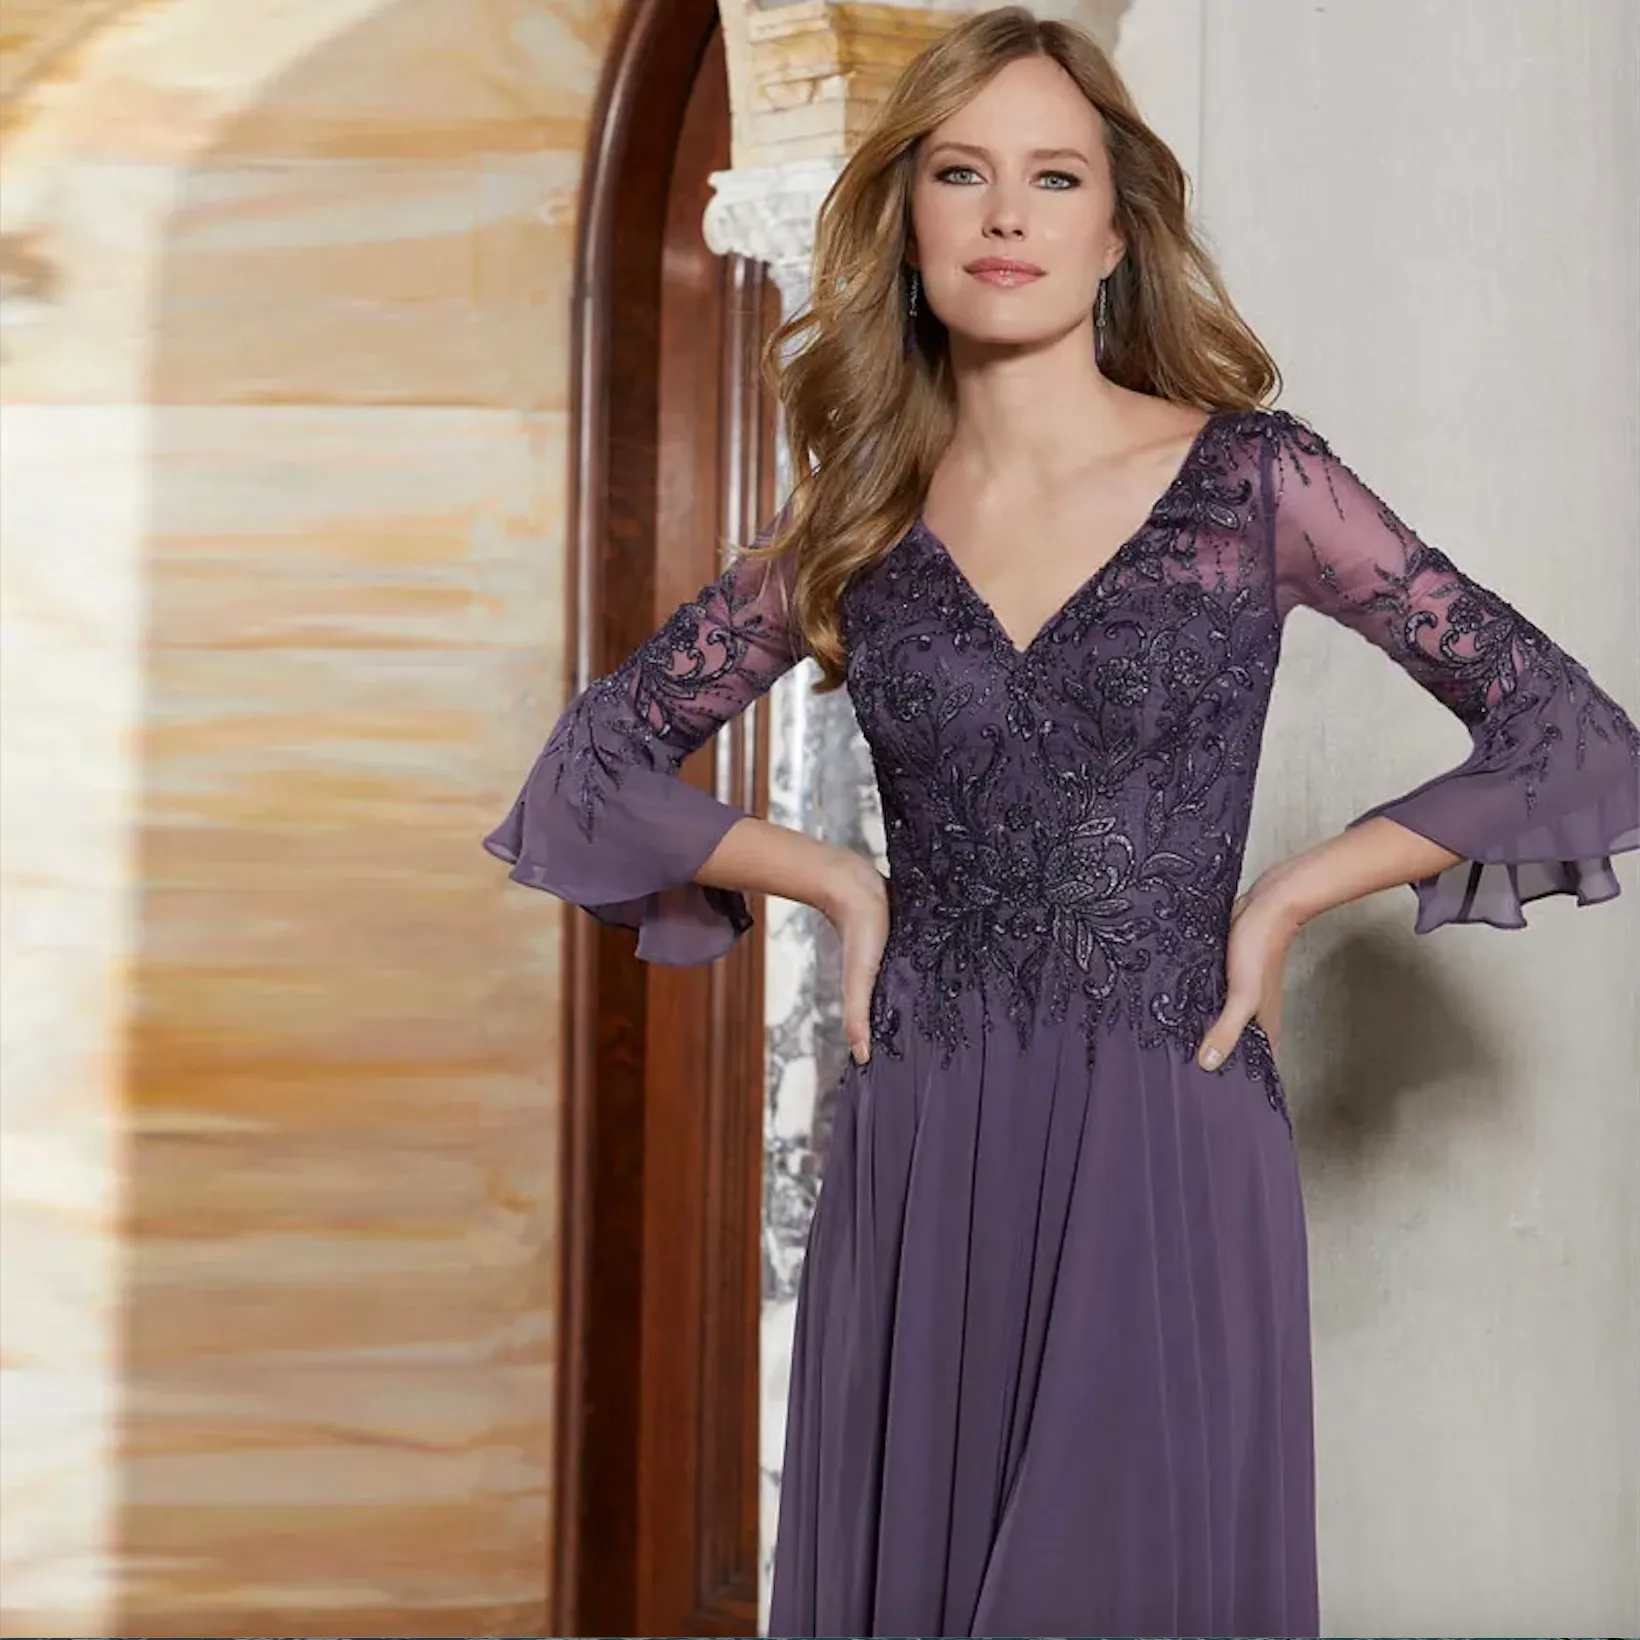 Half Horn Sleeve Mother of The Bride Dresses Beaded Chiffon Formal Gown Purple Lace Applique vestidos para muje